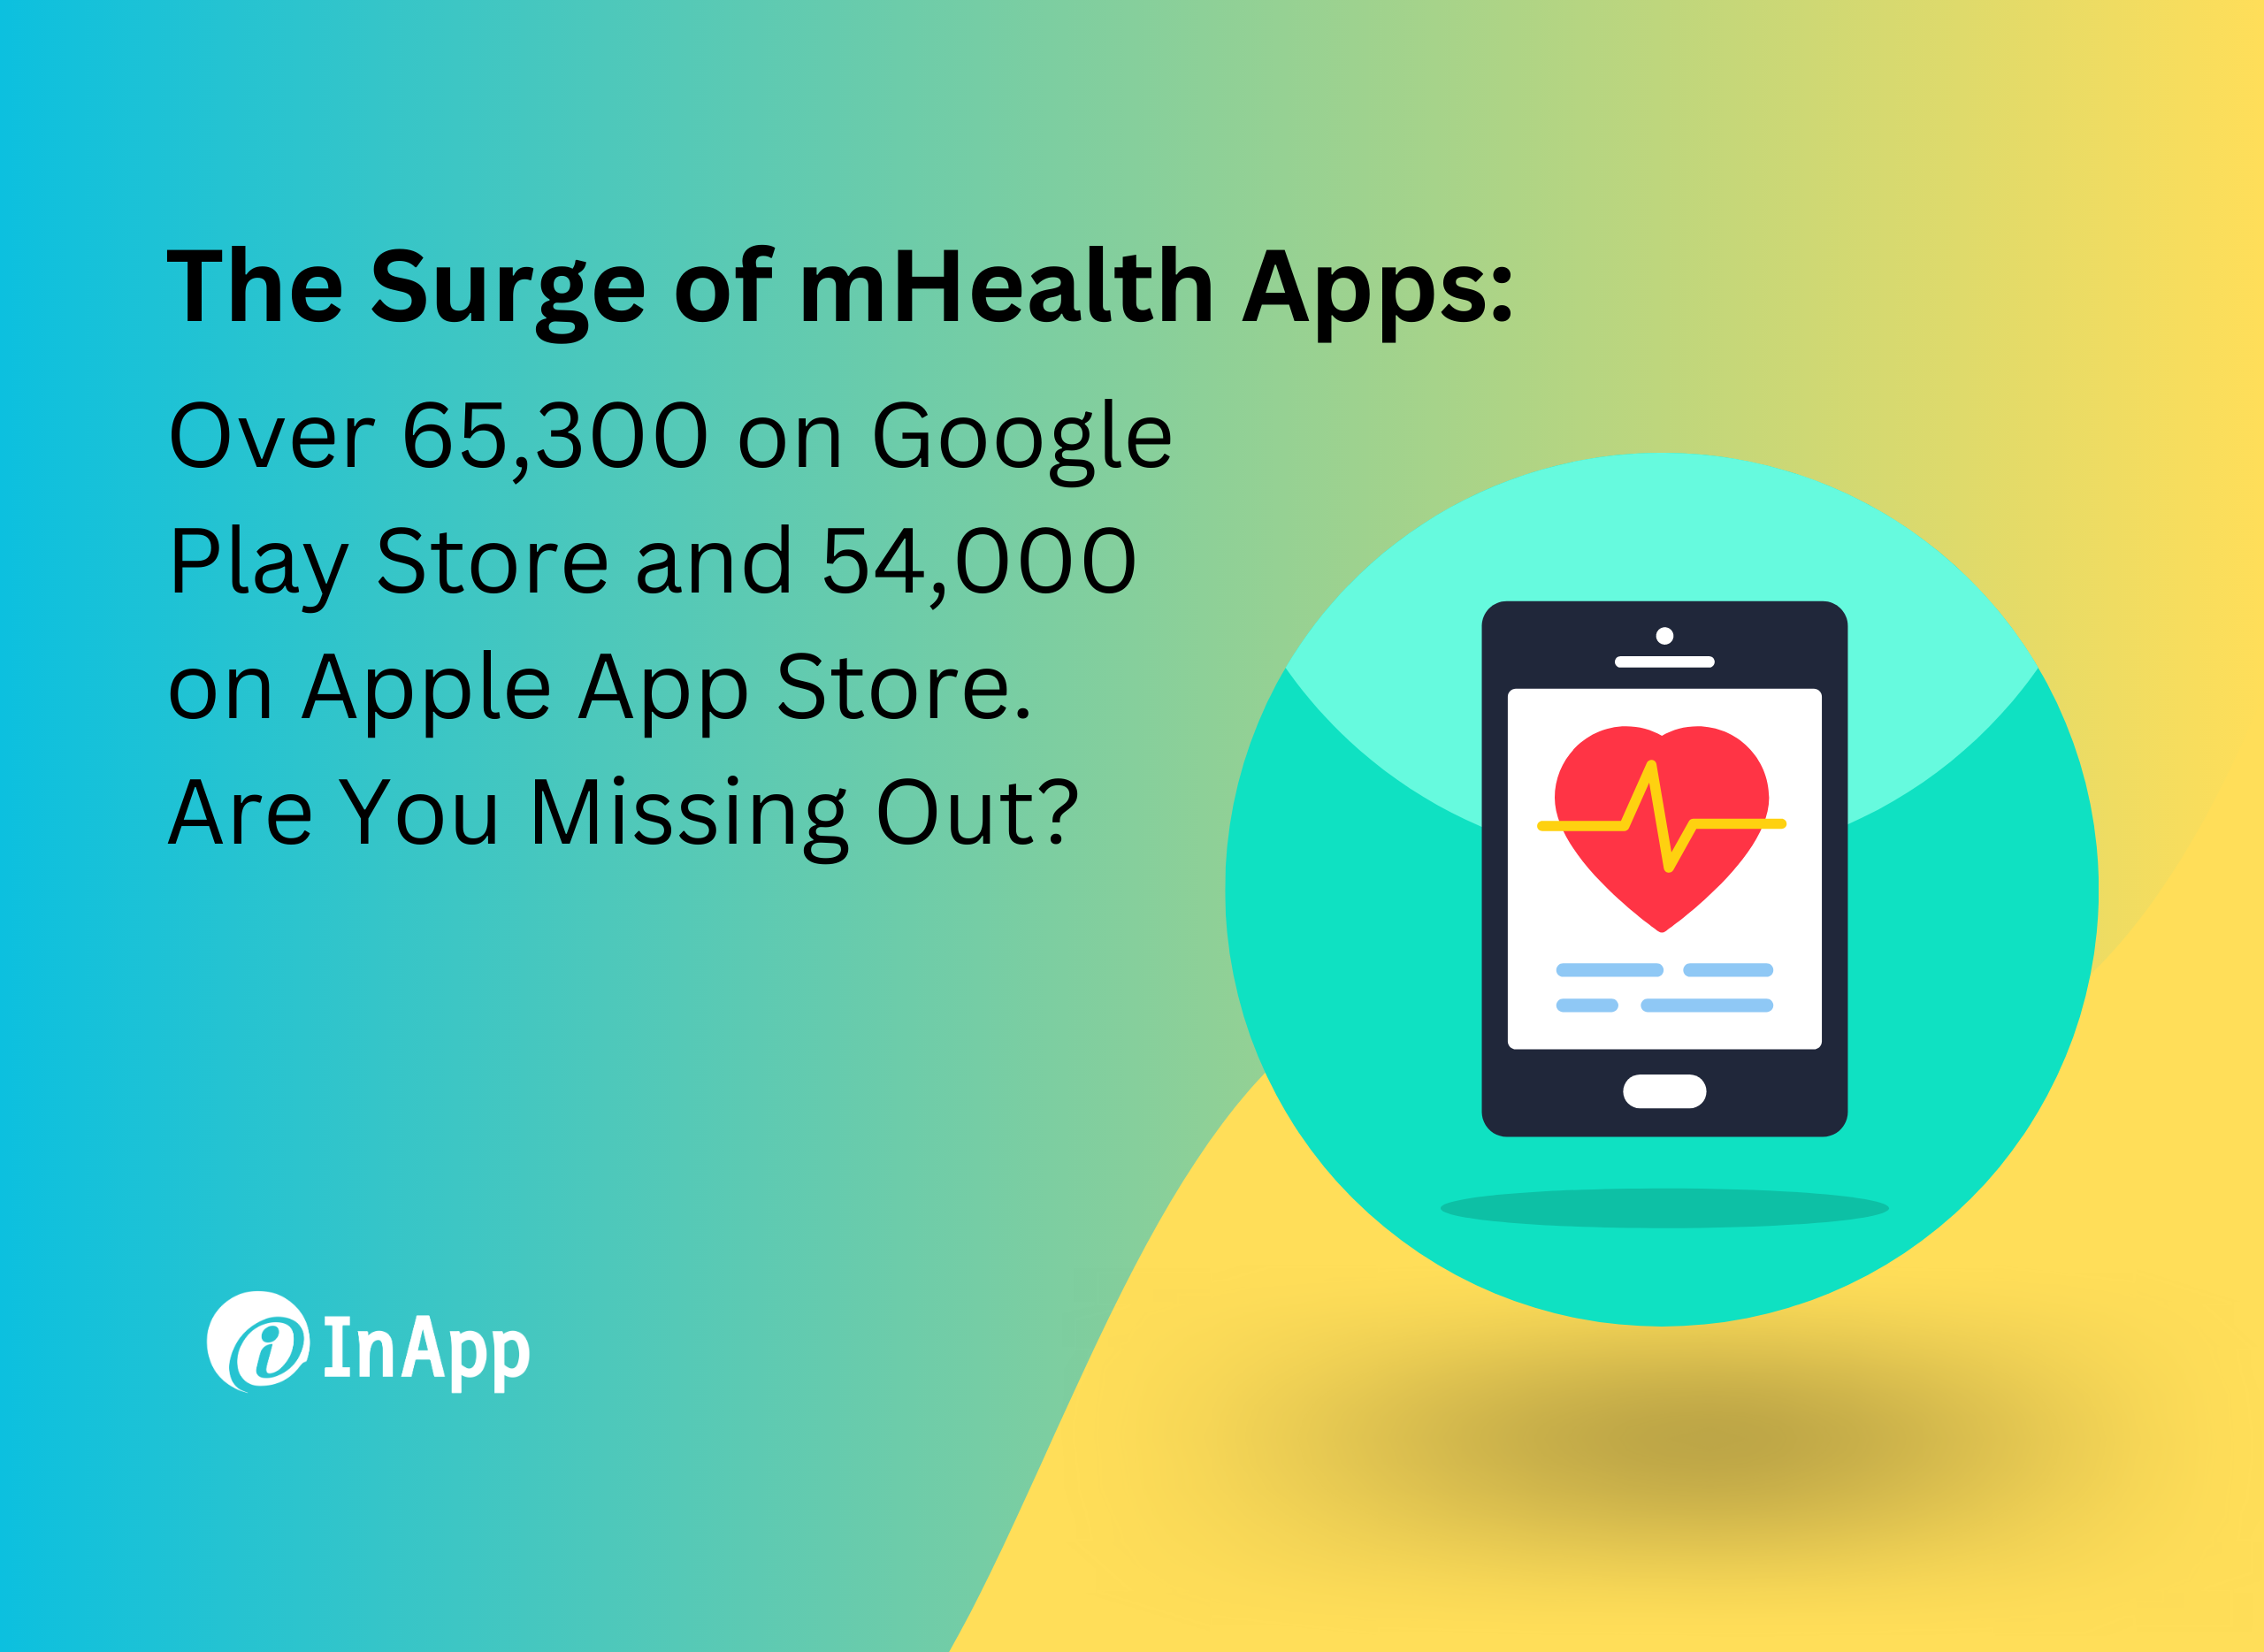 https://inapp.com/wp-content/uploads/2023/07/The-Surge-of-mHealth-Apps-Over-65300-on-Google-Play-Store-and-54000-on-Apple-App-Store.-Are-You-Missing-Out.png